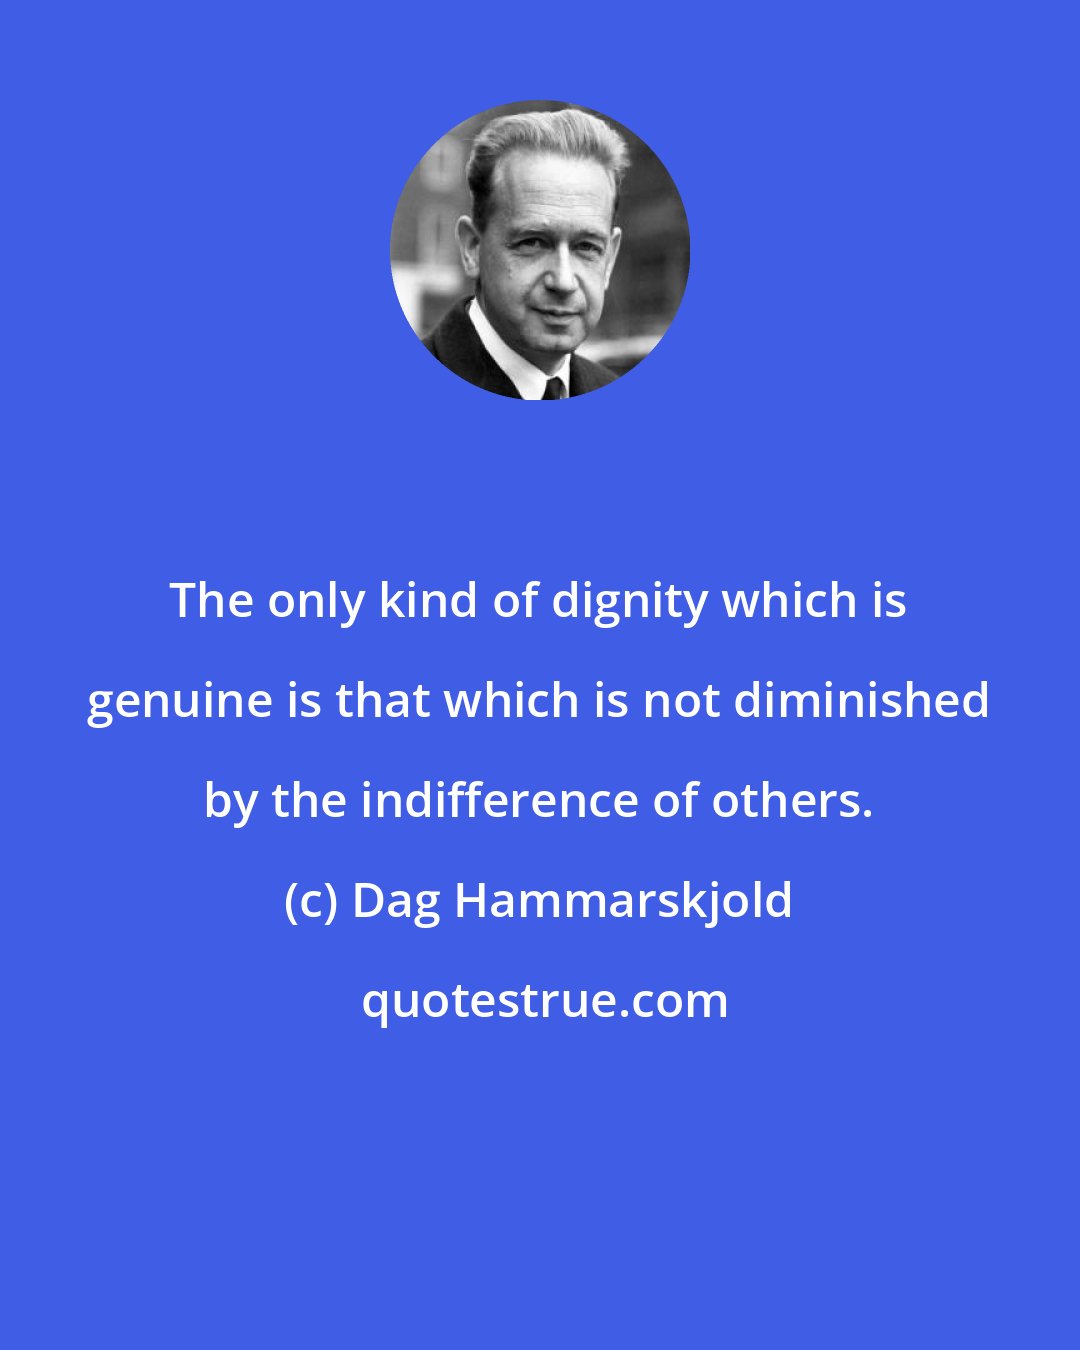 Dag Hammarskjold: The only kind of dignity which is genuine is that which is not diminished by the indifference of others.